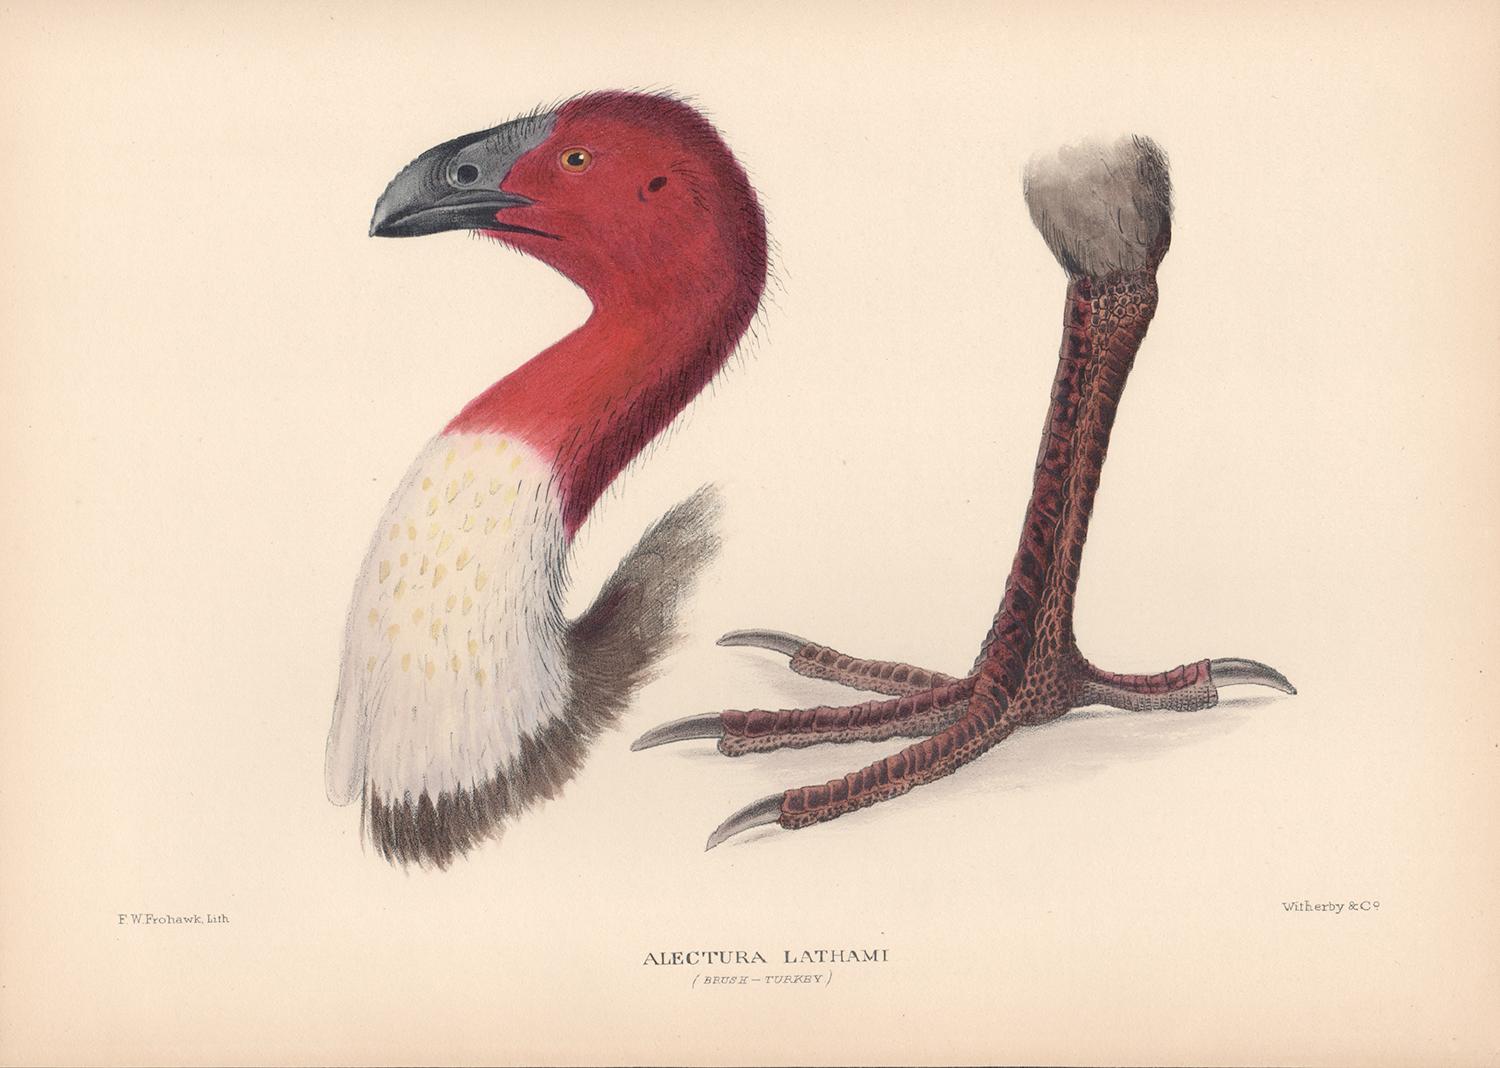 Brush-Turkey, Bird lithograph with hand-colouring, 1928